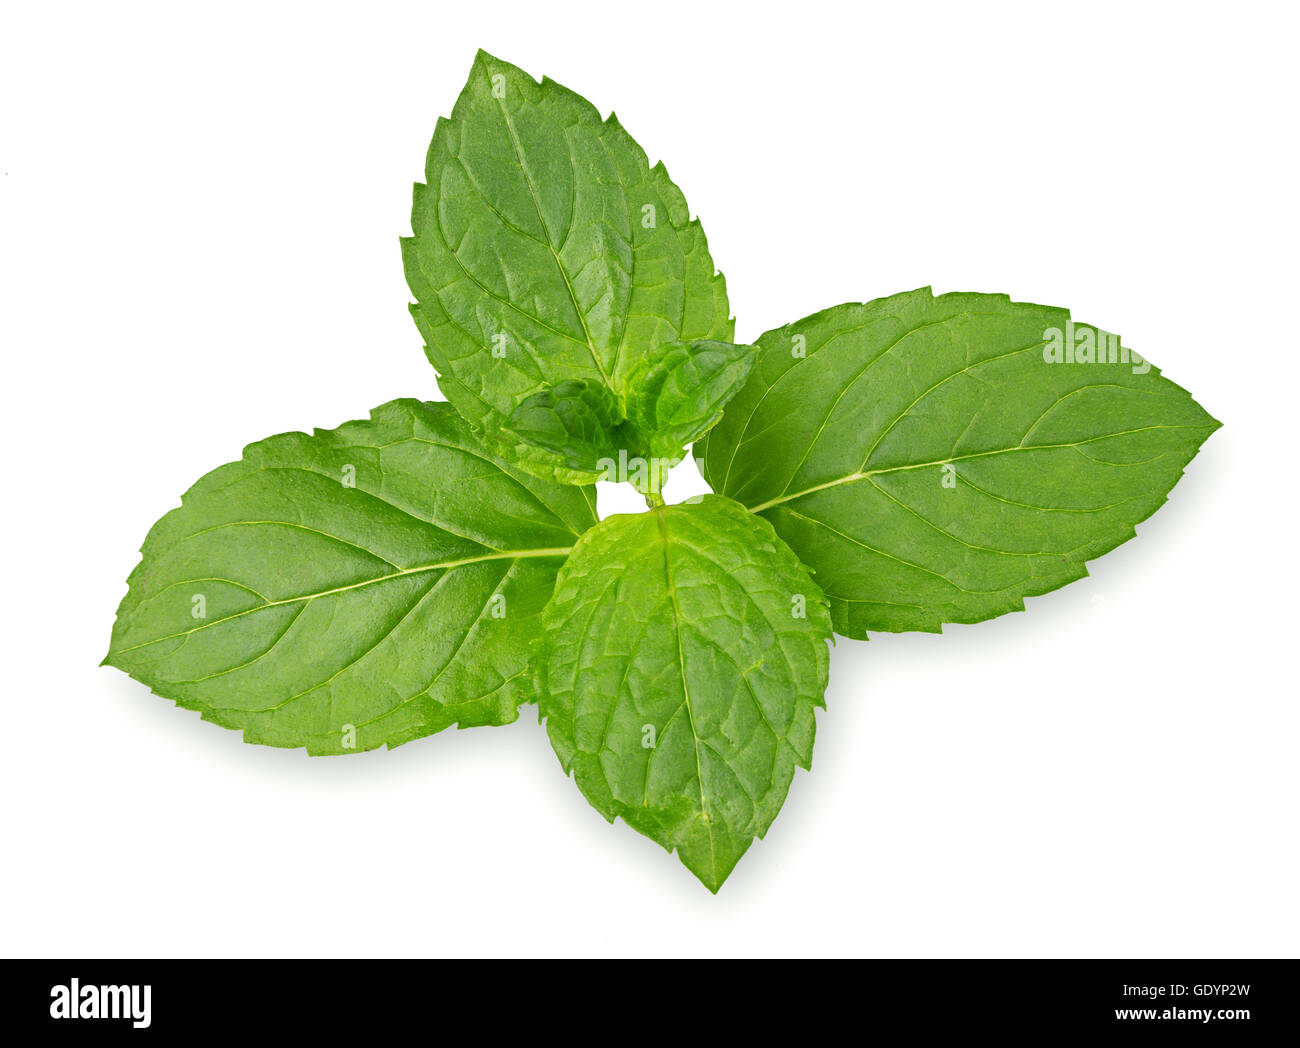 green min leaf herb isolated on white background Stock Photo